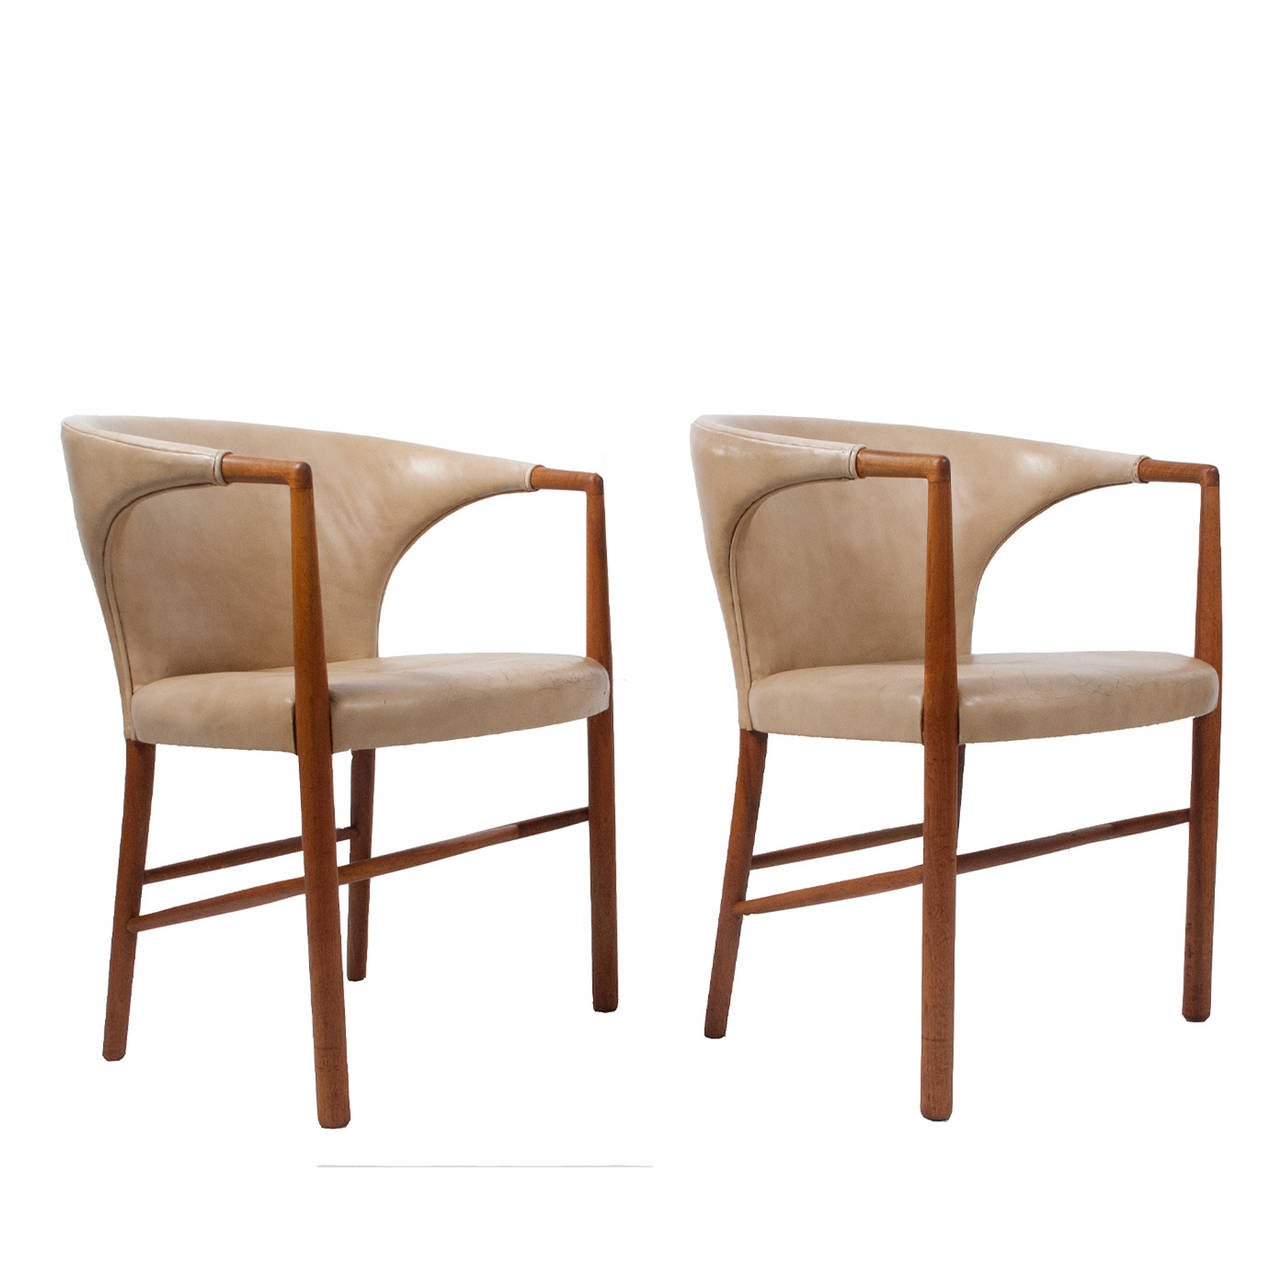 Original leather on African mahogany frame, these chairs are upholstered version of the chairs designed for the UN. Retains label, Jacob Kjaer Mobelhandvaerk, Udfort, 1954.